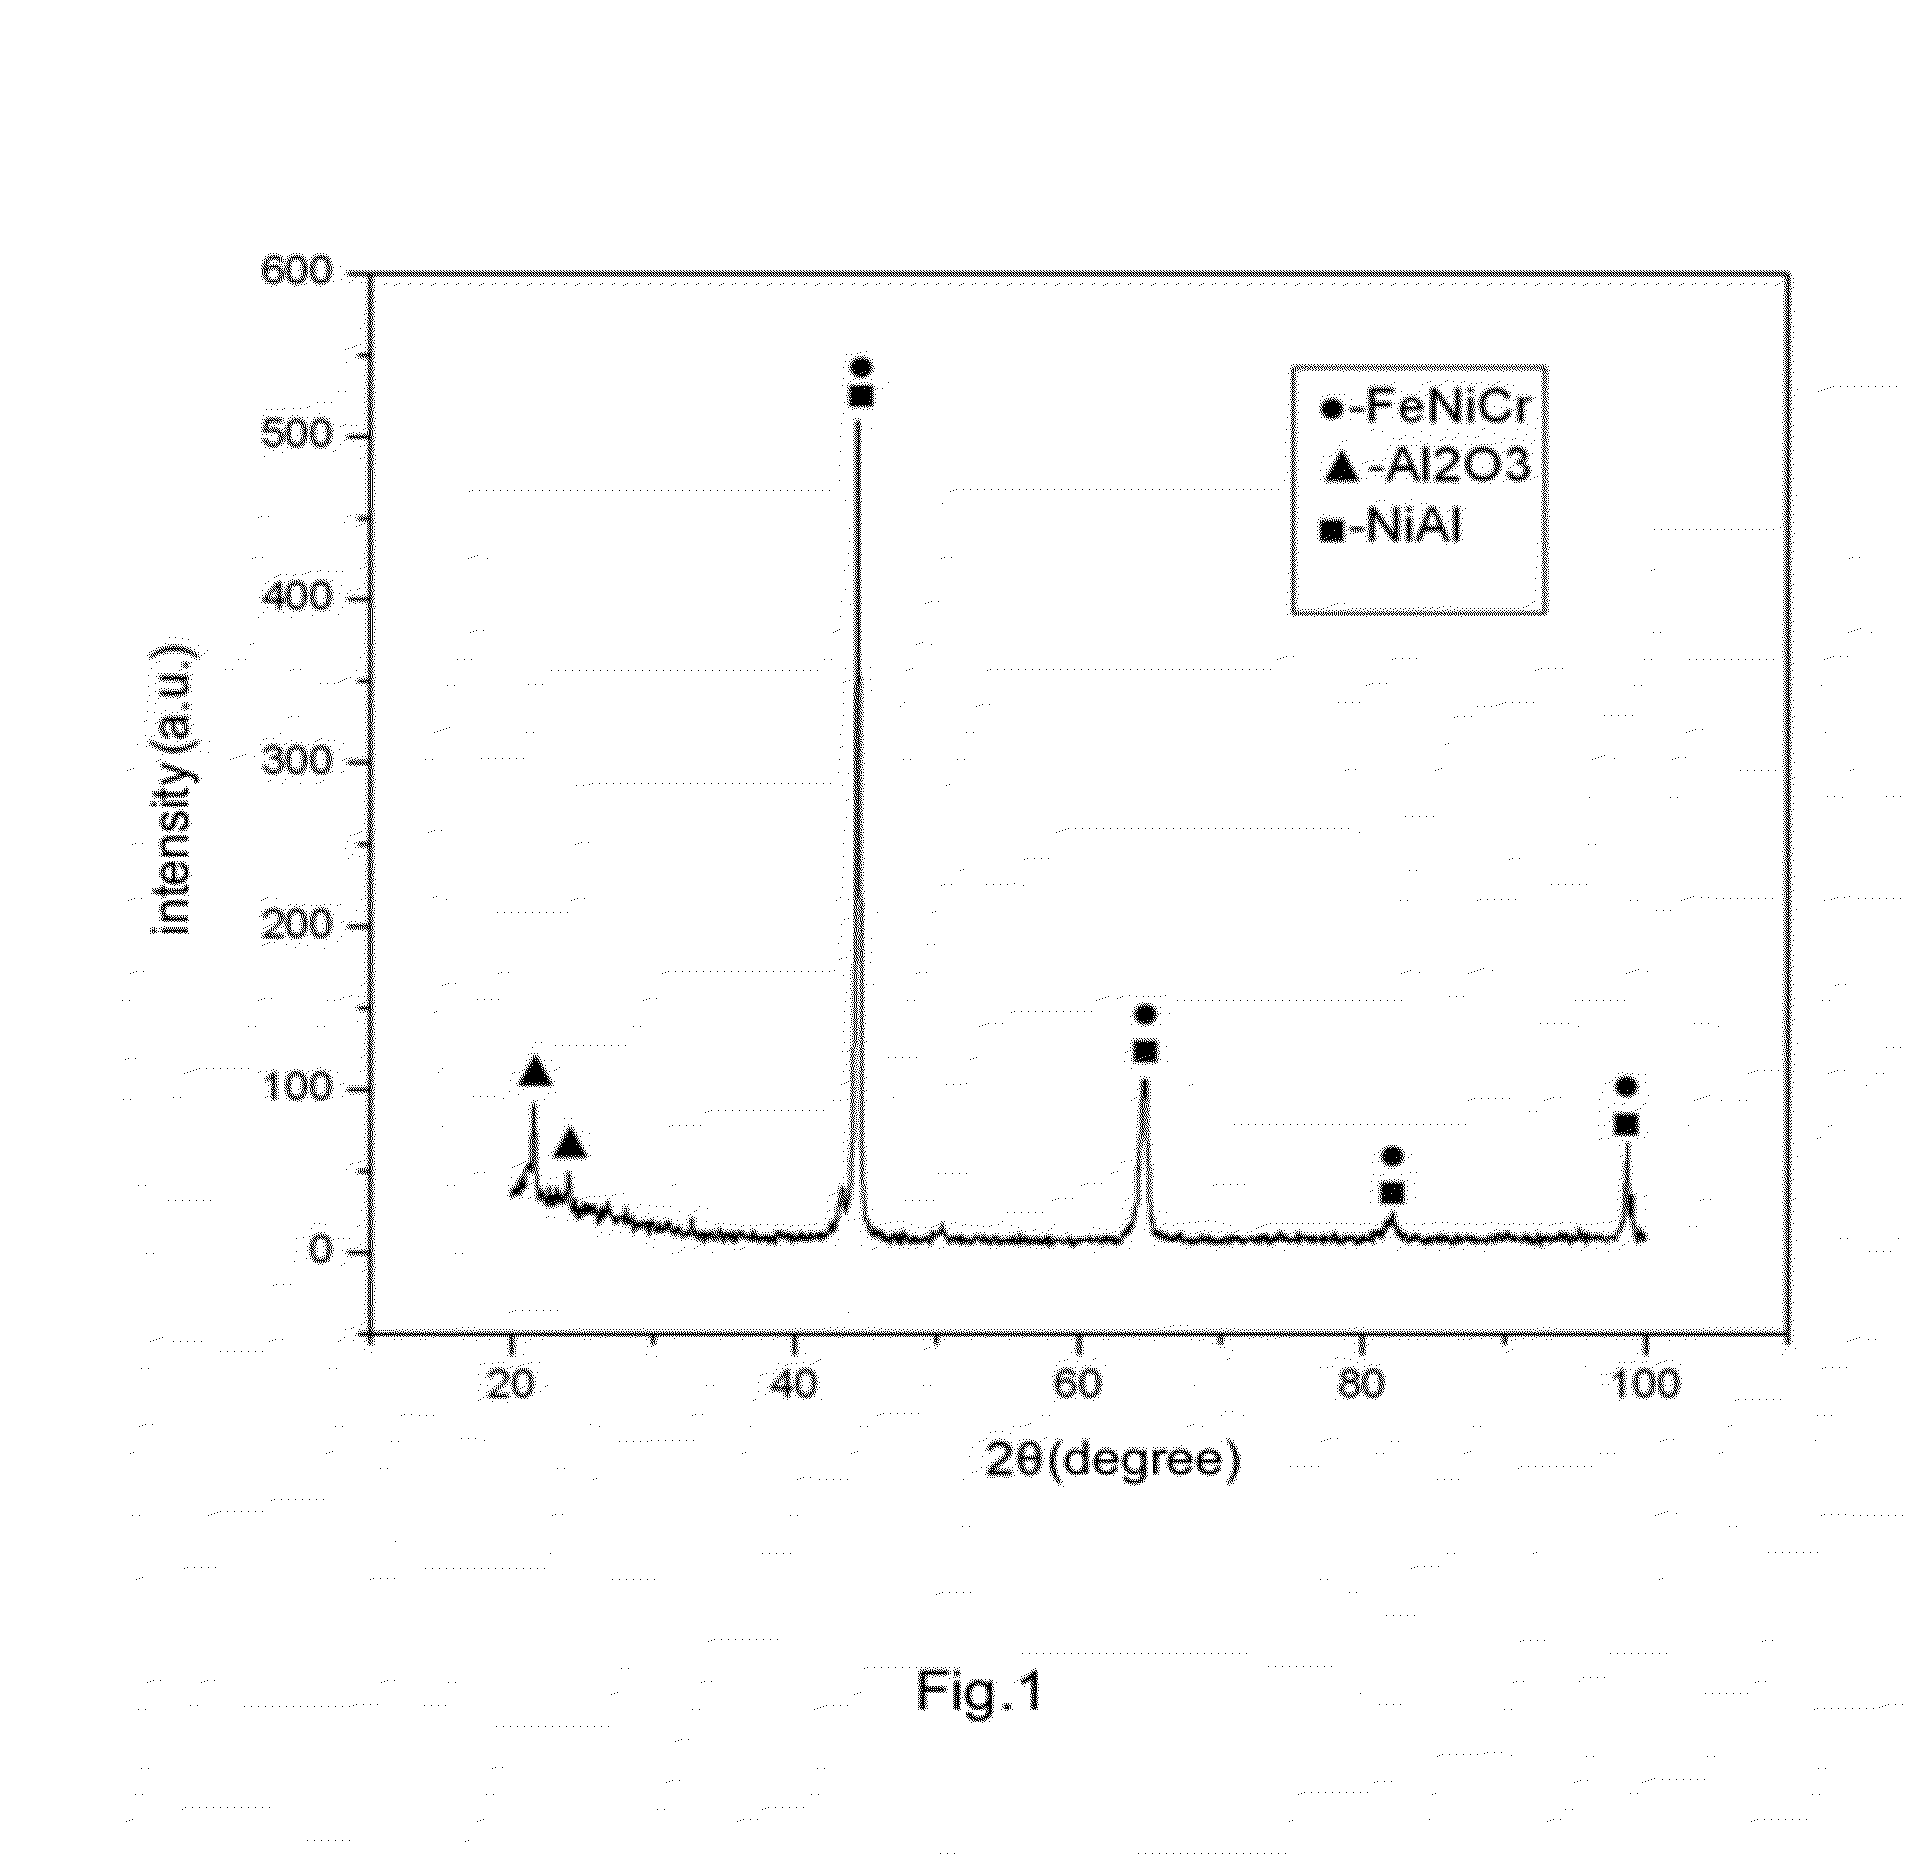 Method of in situ synthesis by thermite reaction with sol-gel and FeNiCrTi/NiAl-A12O3 nanocomposite materials prepared by the method